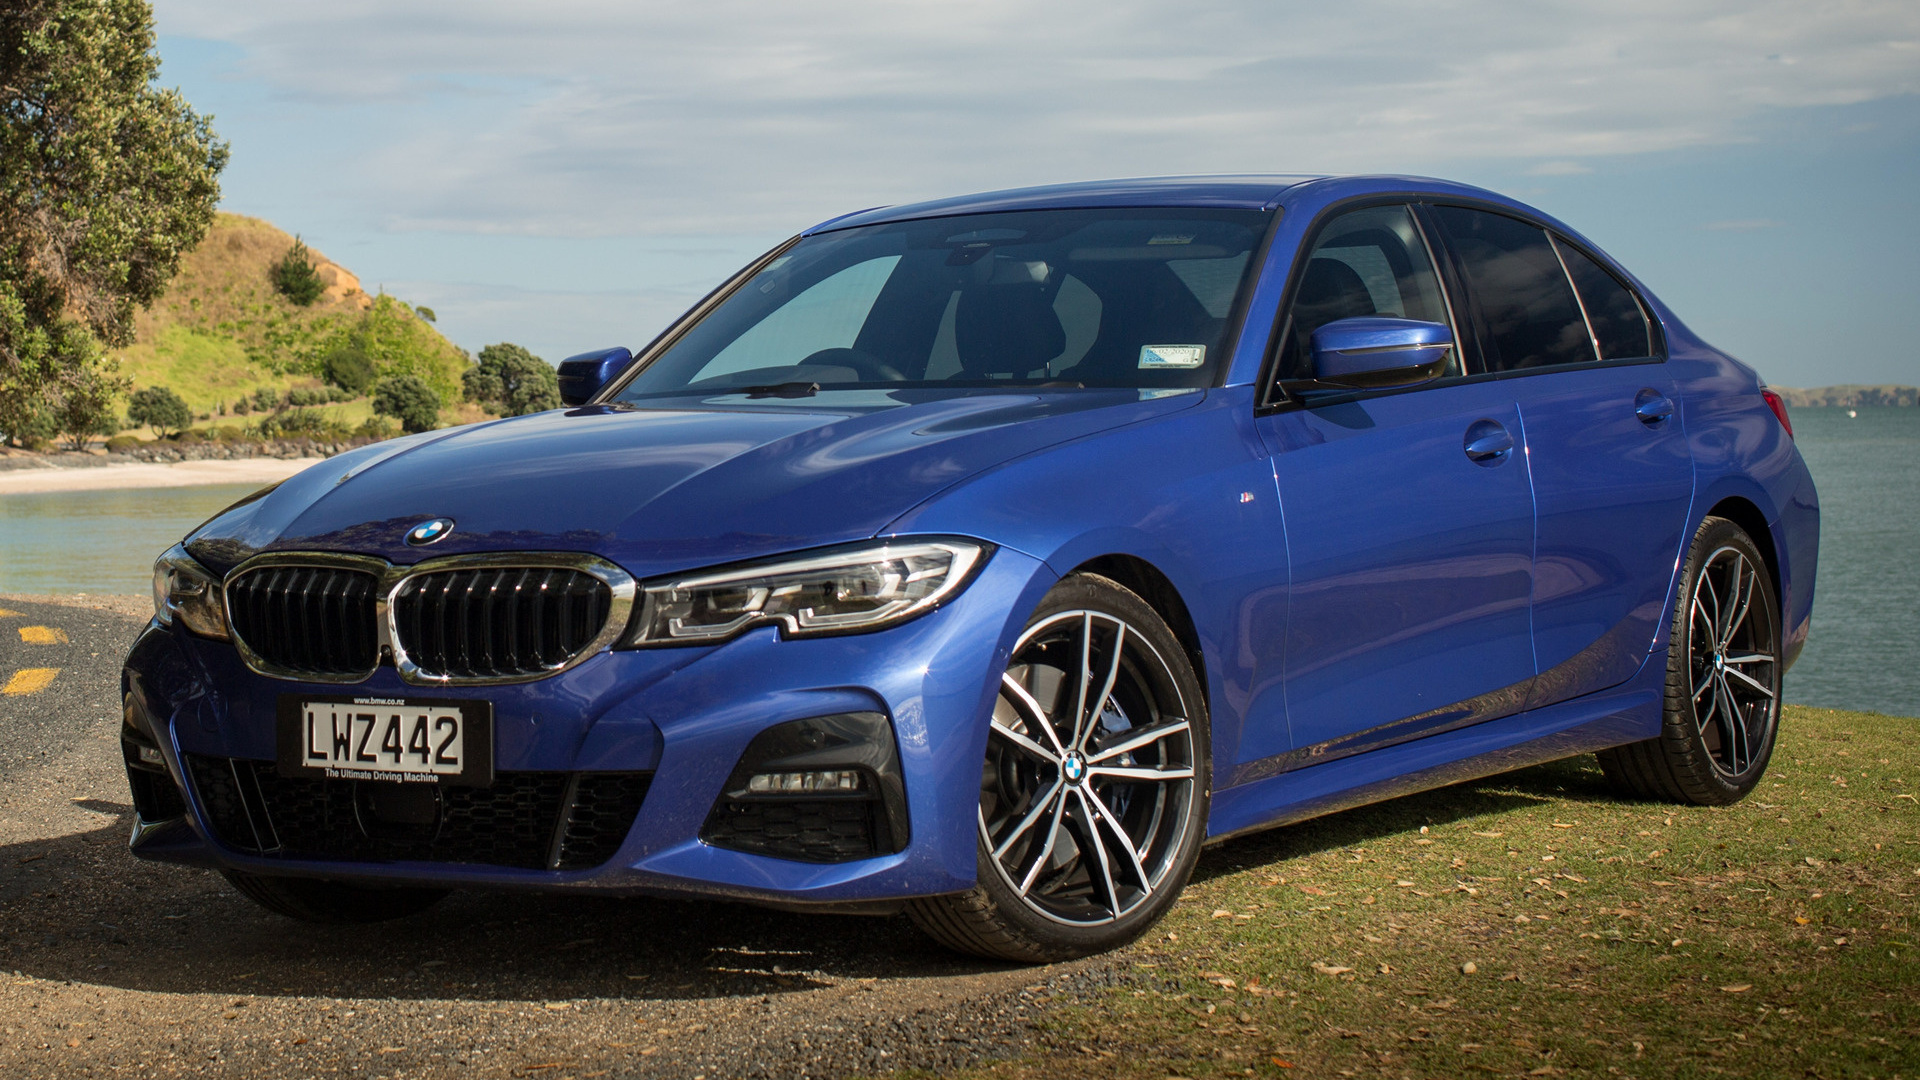 2019 BMW 3 Series M Sport (AU) Wallpapers and HD Images